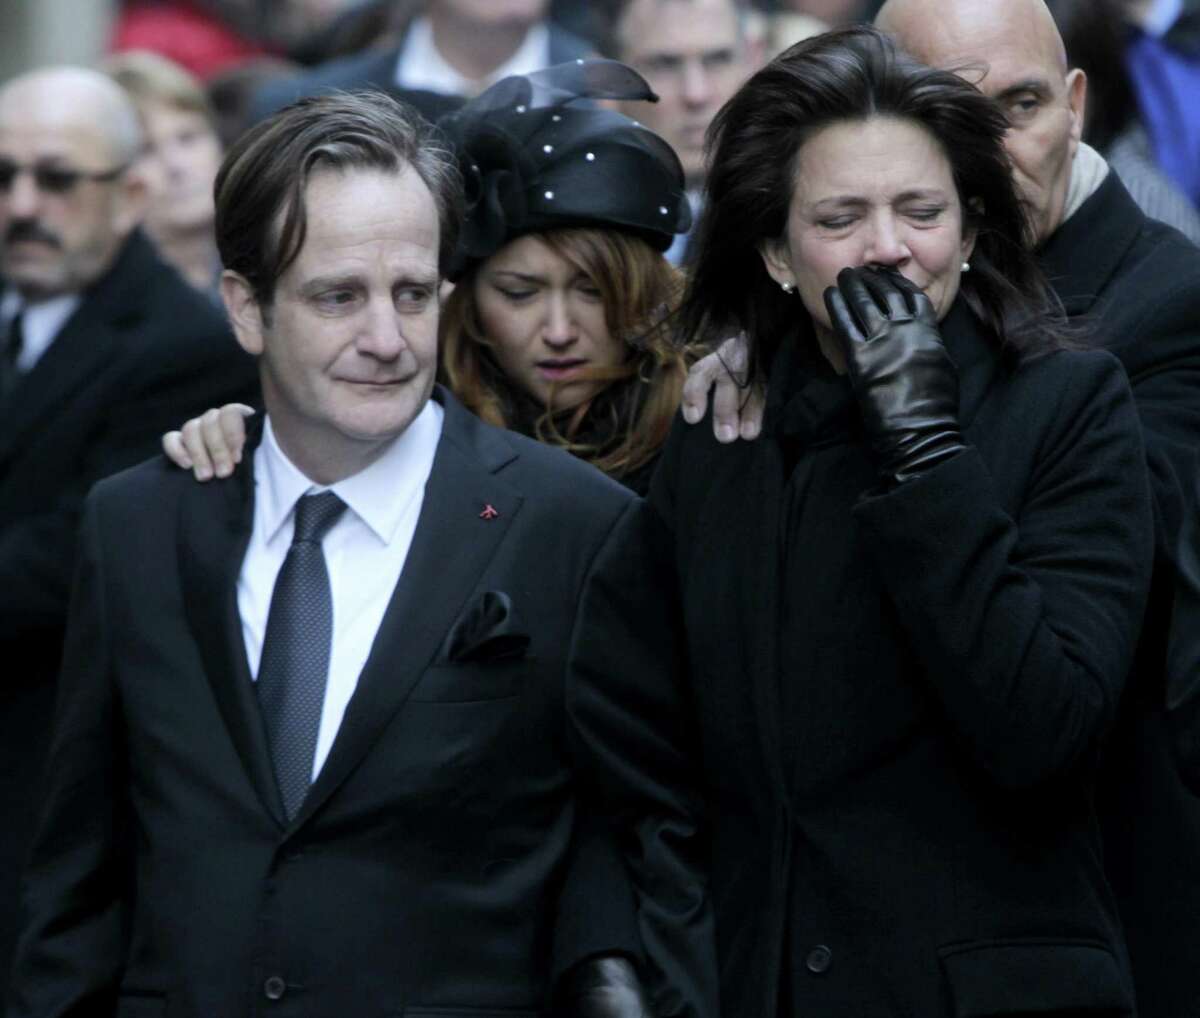 Matthew Badger, left, and Madonna Badger, the parents of three children that were killed in a fire, react as their caskets are carried into a church during the funeral in New York, Thursday, Jan. 5, 2012. Hundreds of people streamed into a historic church in the heart of Manhattan on Thursday for the funeral of three young girls who died along with their grandparents during a Christmas morning fire in Stamford, Conn. (AP Photo/Seth Wenig)